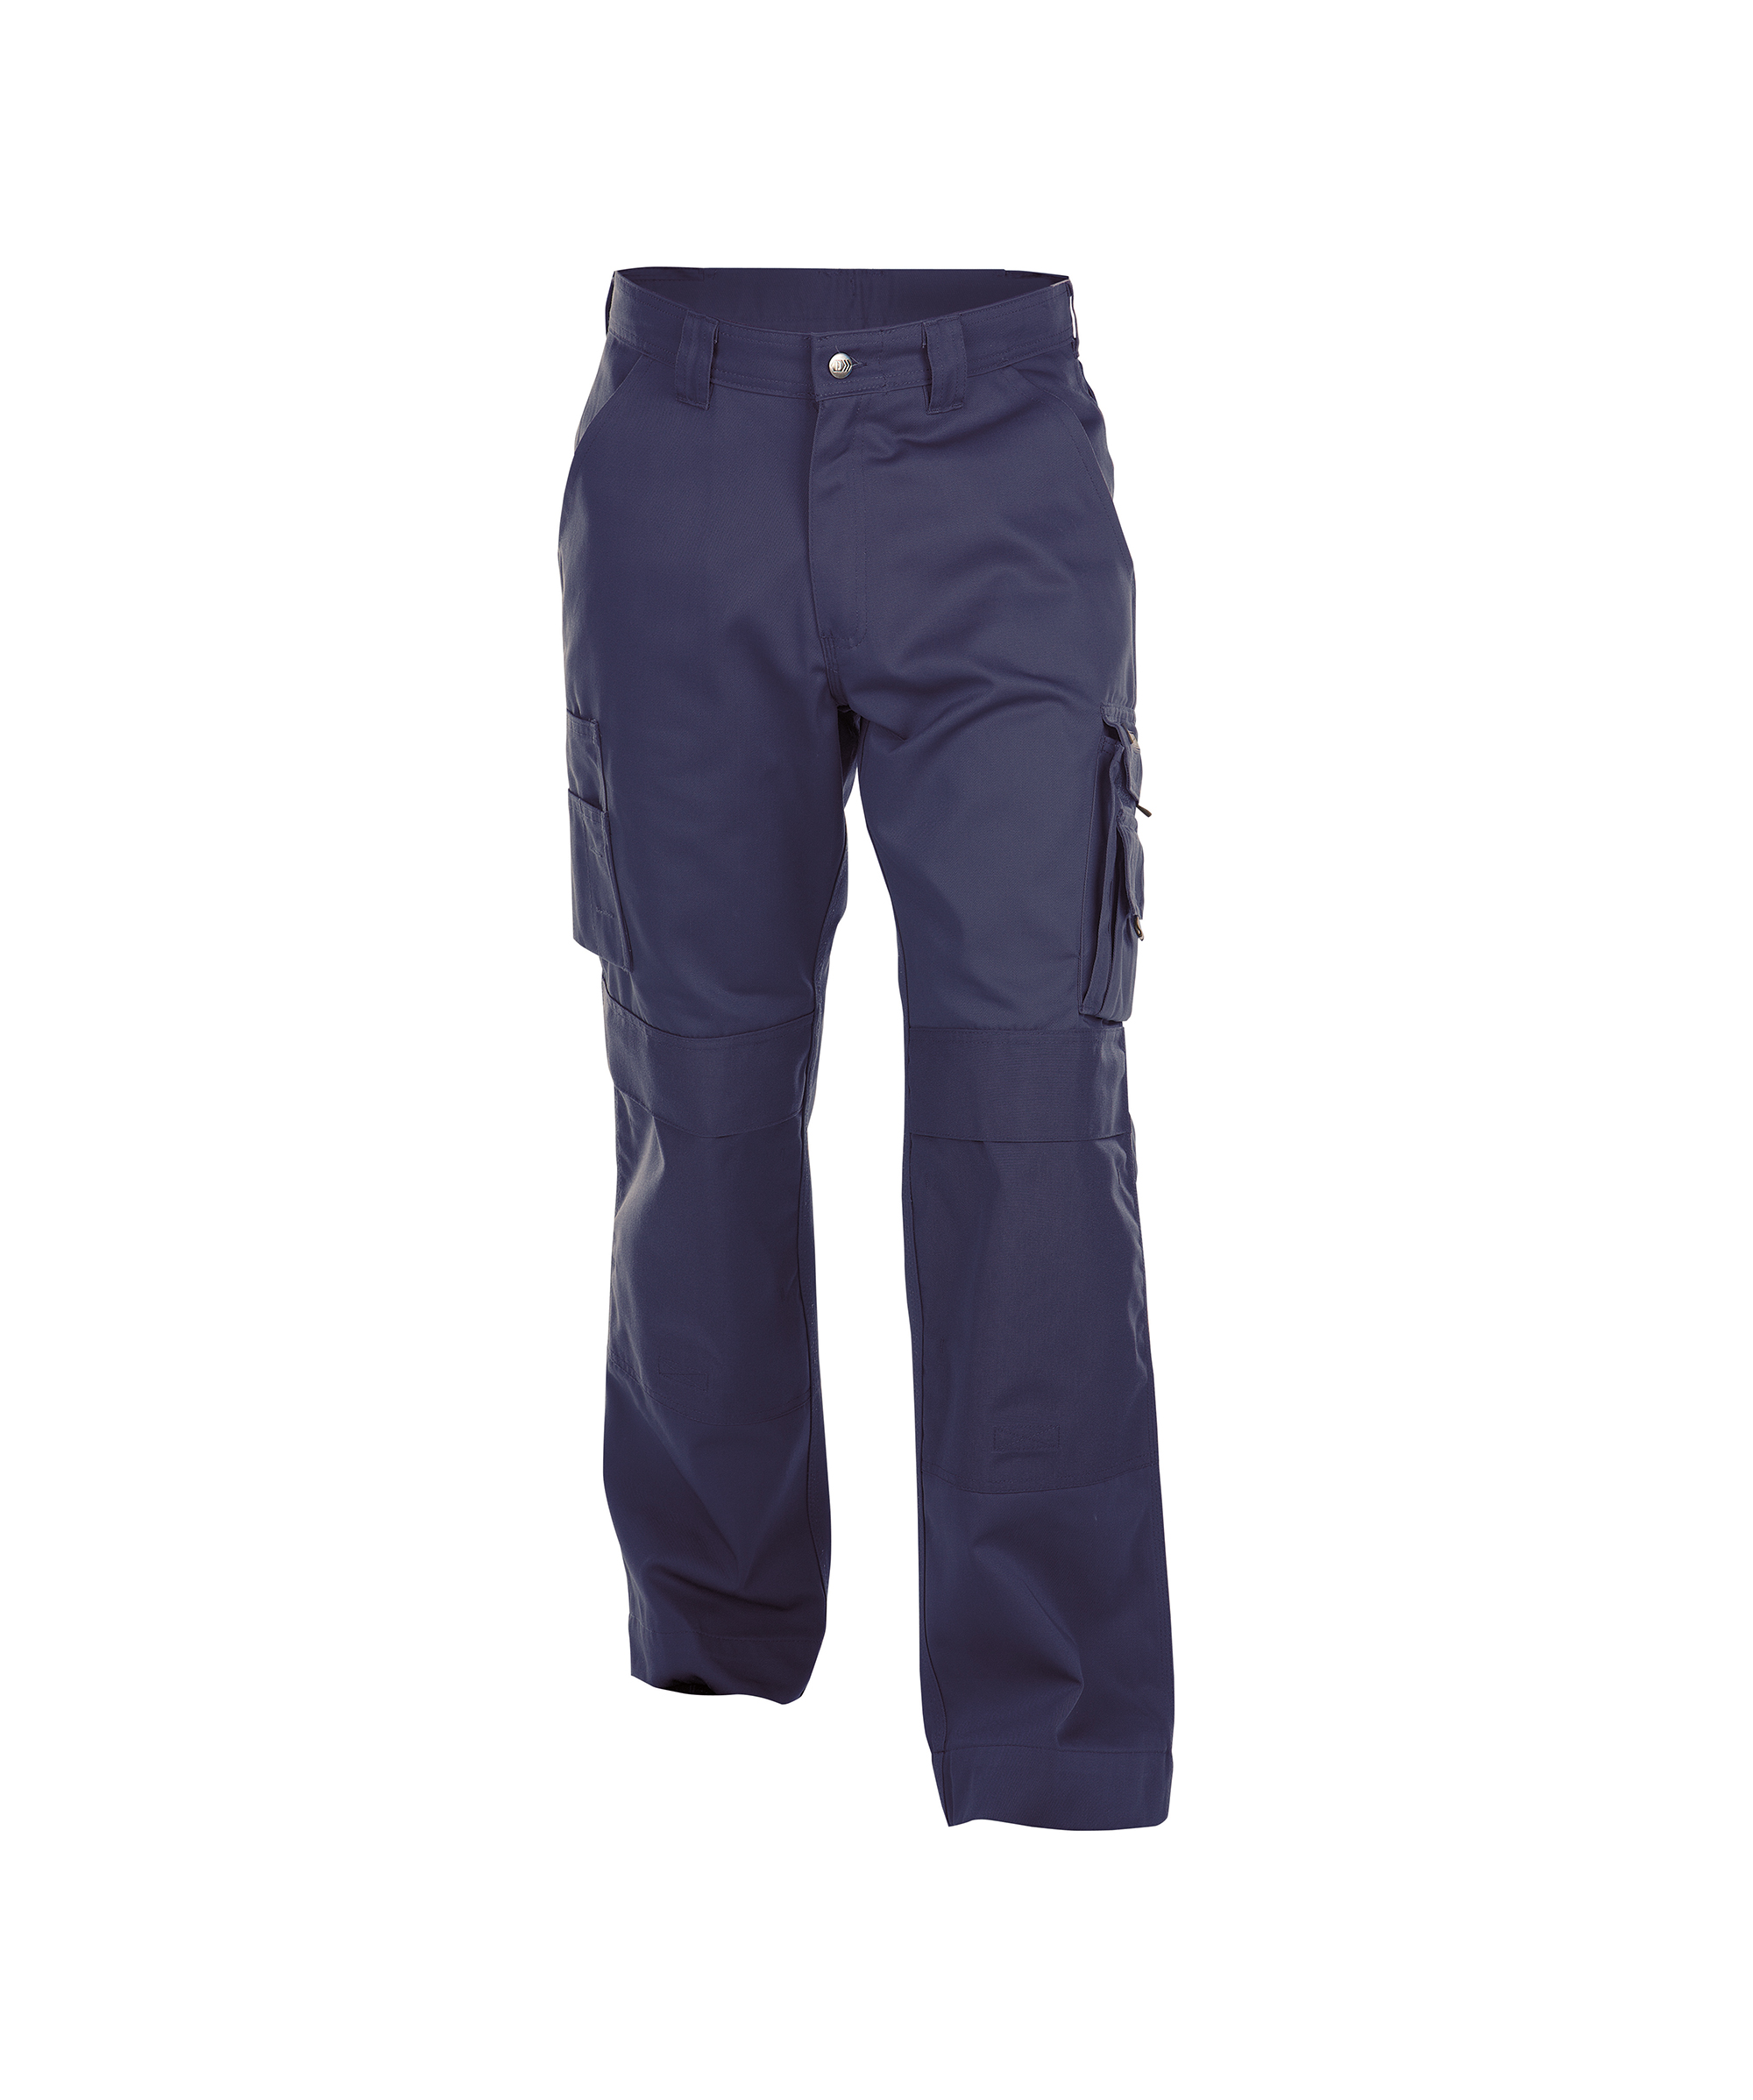 miami_work-trousers-with-knee-pockets_navy_front.jpg